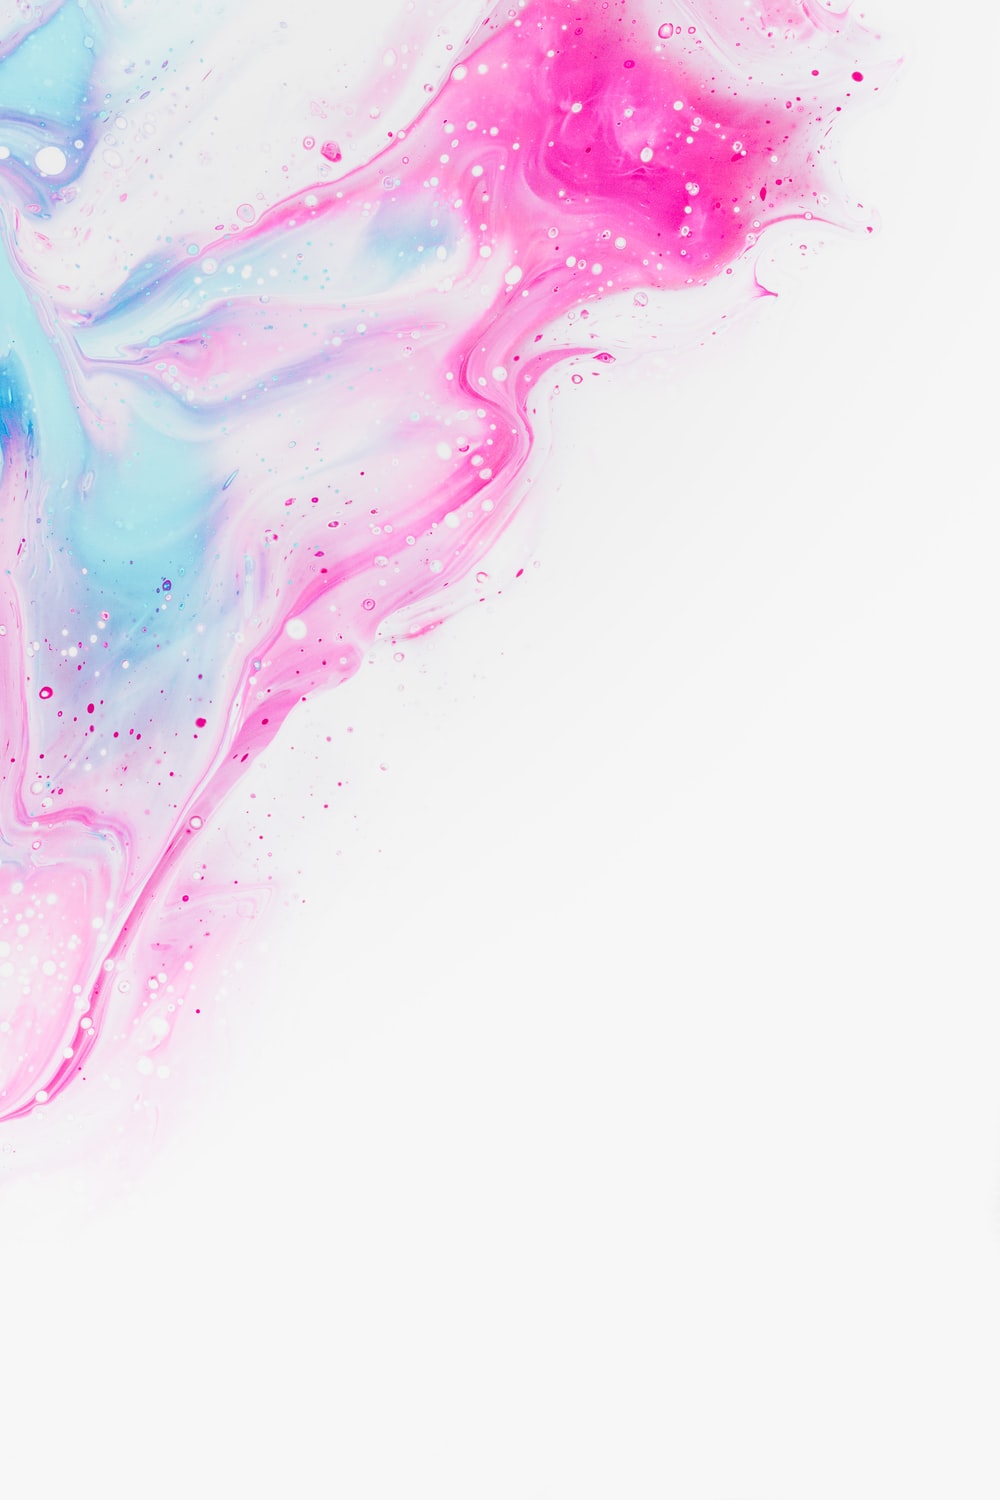 Watercolor Background Image: Download HD Background